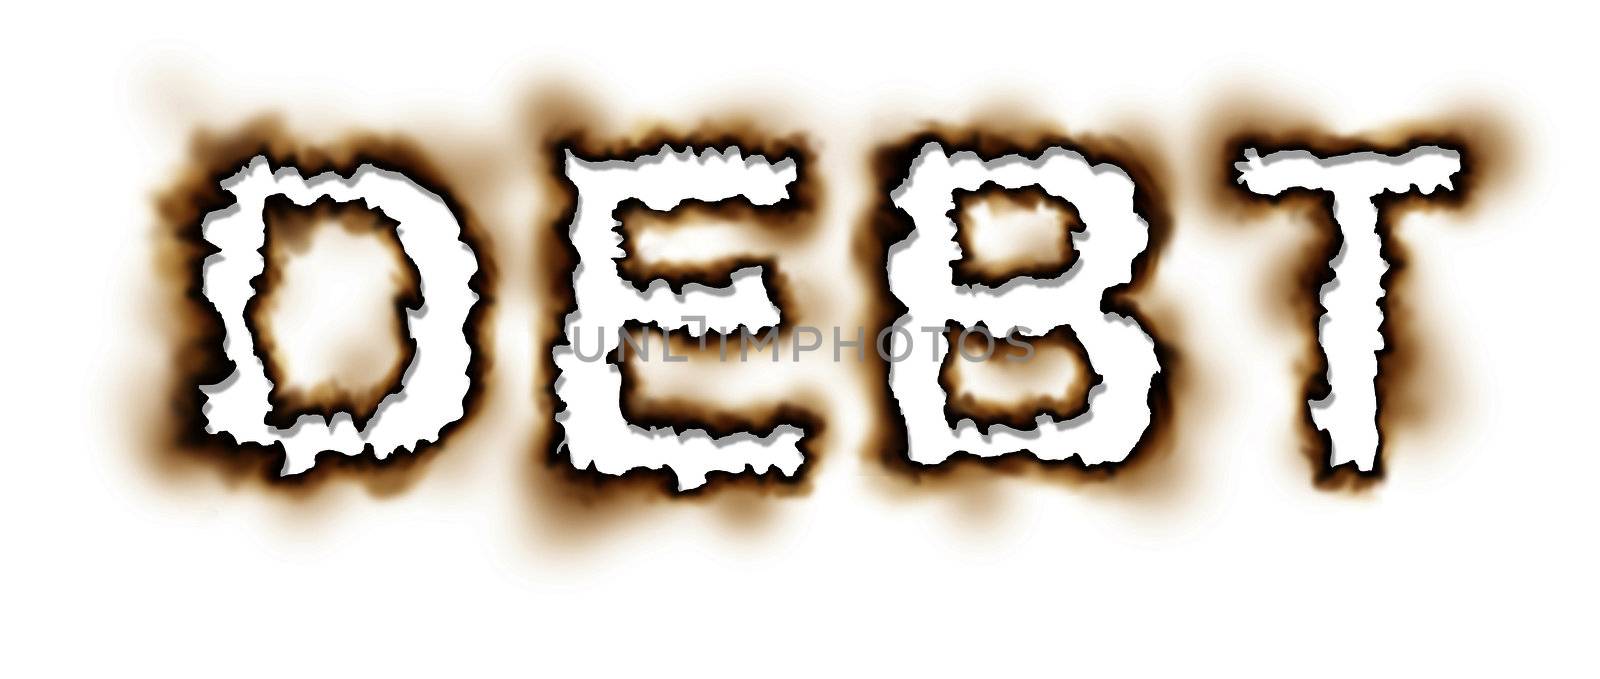 Burning Debt Problems and financial crisis concept with the word burnt as a hole in the paper as an icon of finance despair and credit stree on a white background.